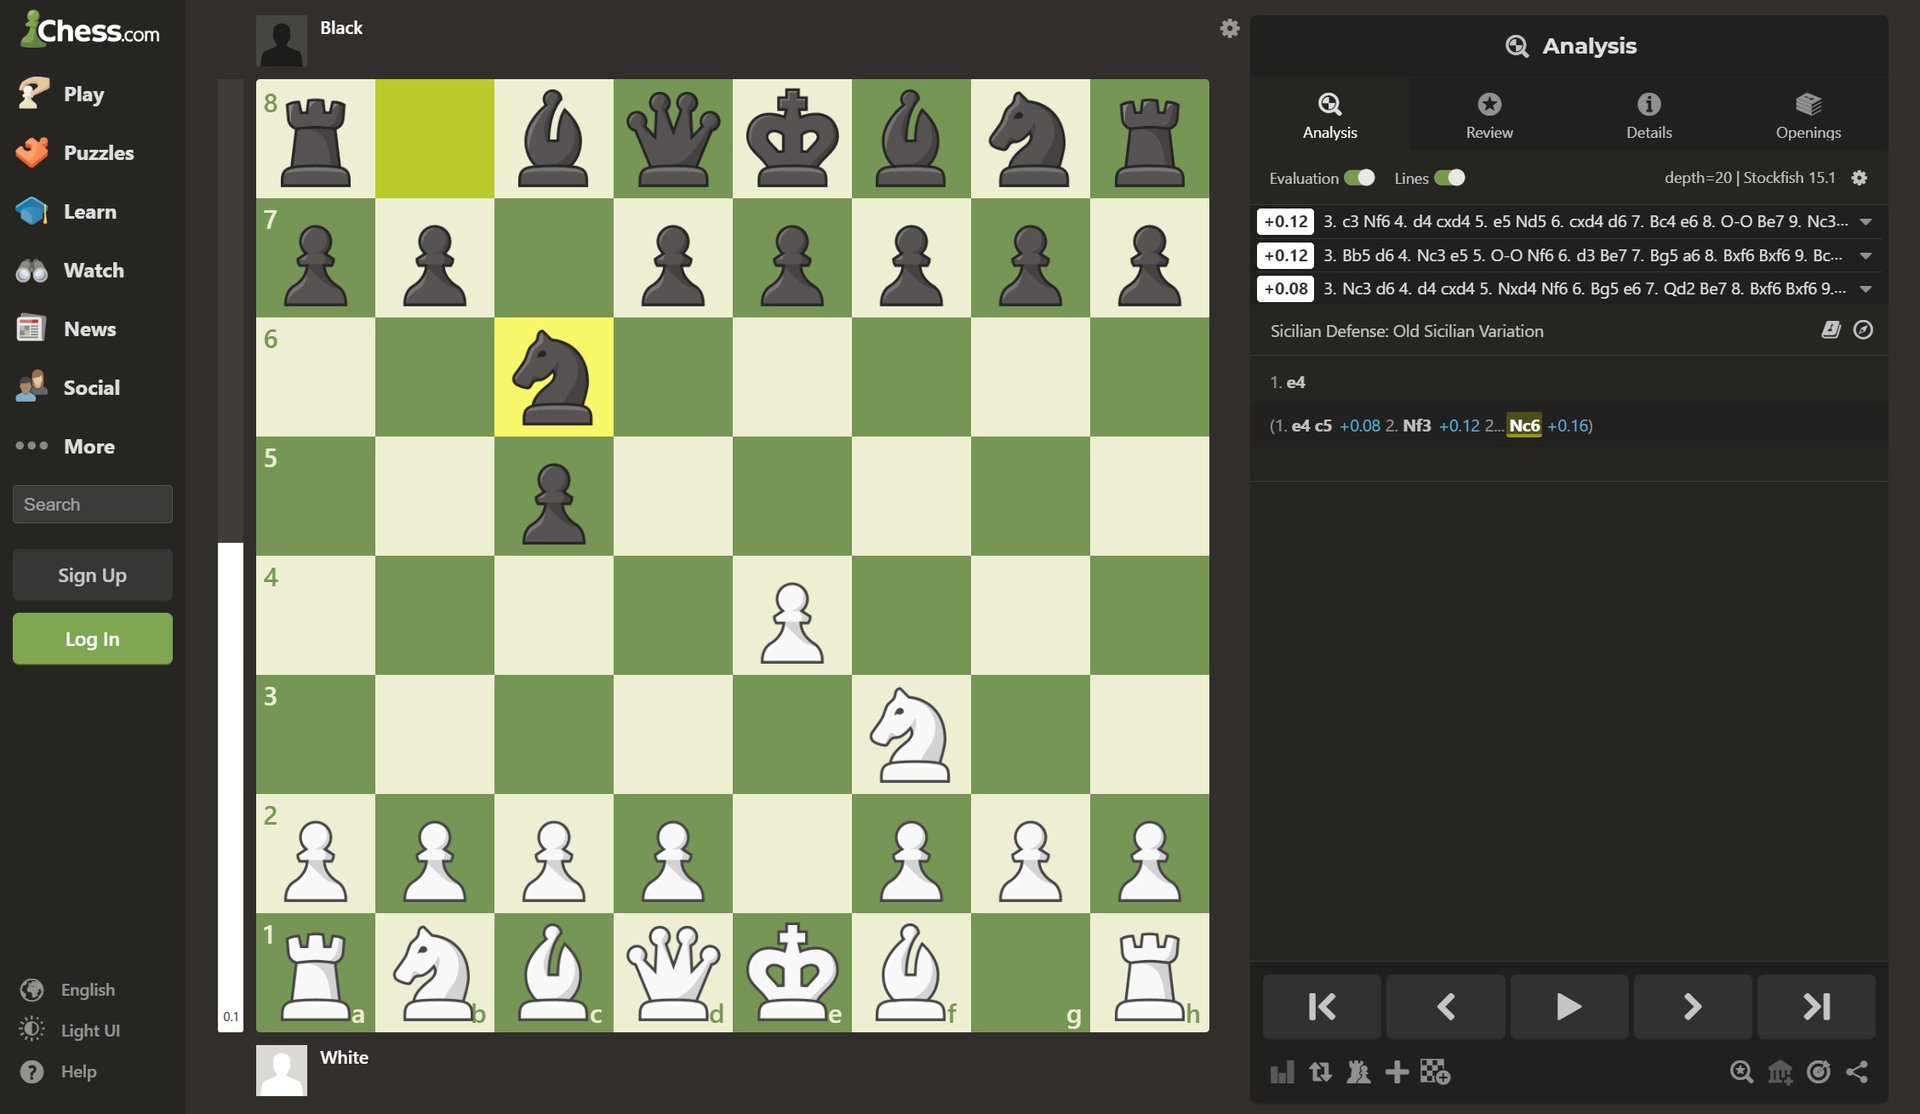 How to Play Chess Using ChatGPT